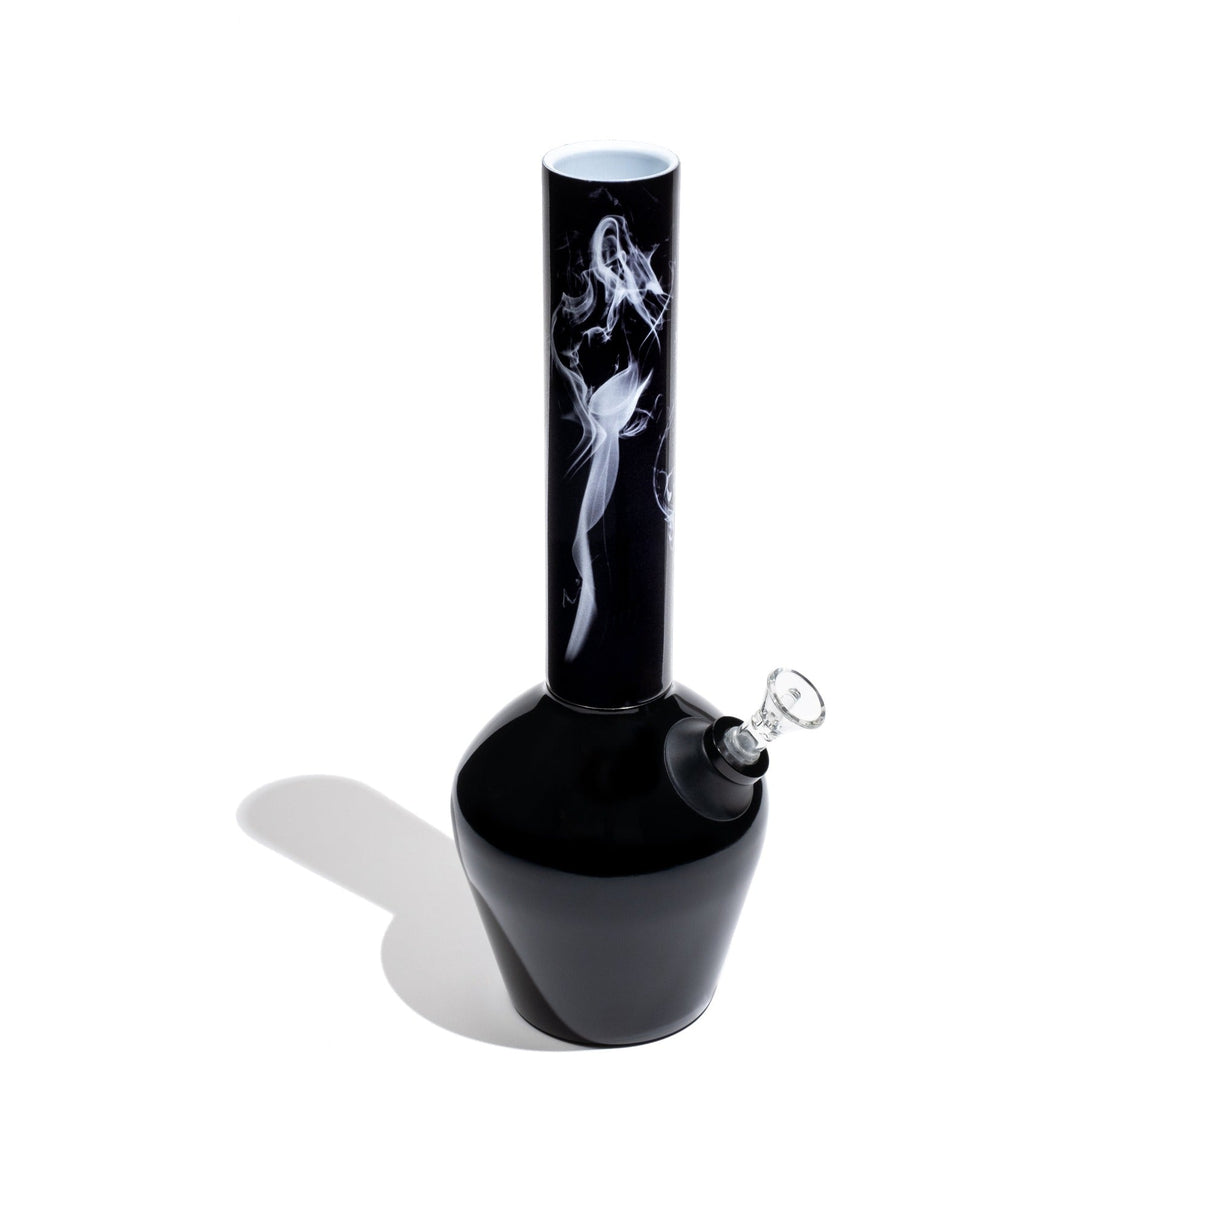 Chill Steel Pipes - Gloss Black Base Bong Part - Angled Side View on White